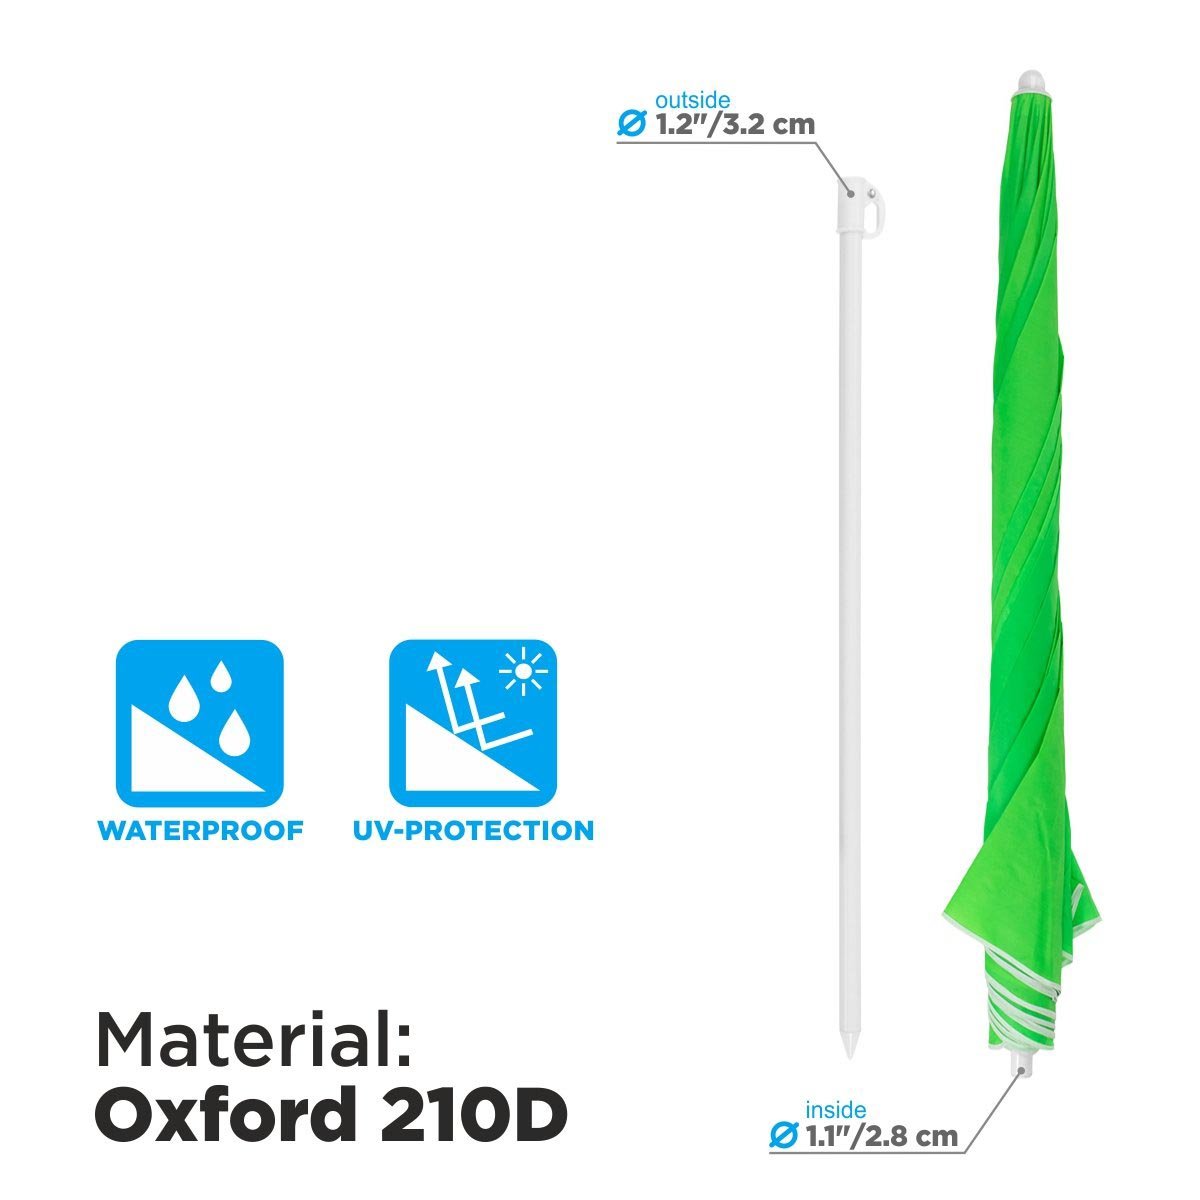 Green Folding Beach Umbrella is made of waterproof Oxford 210D featuring UV protection